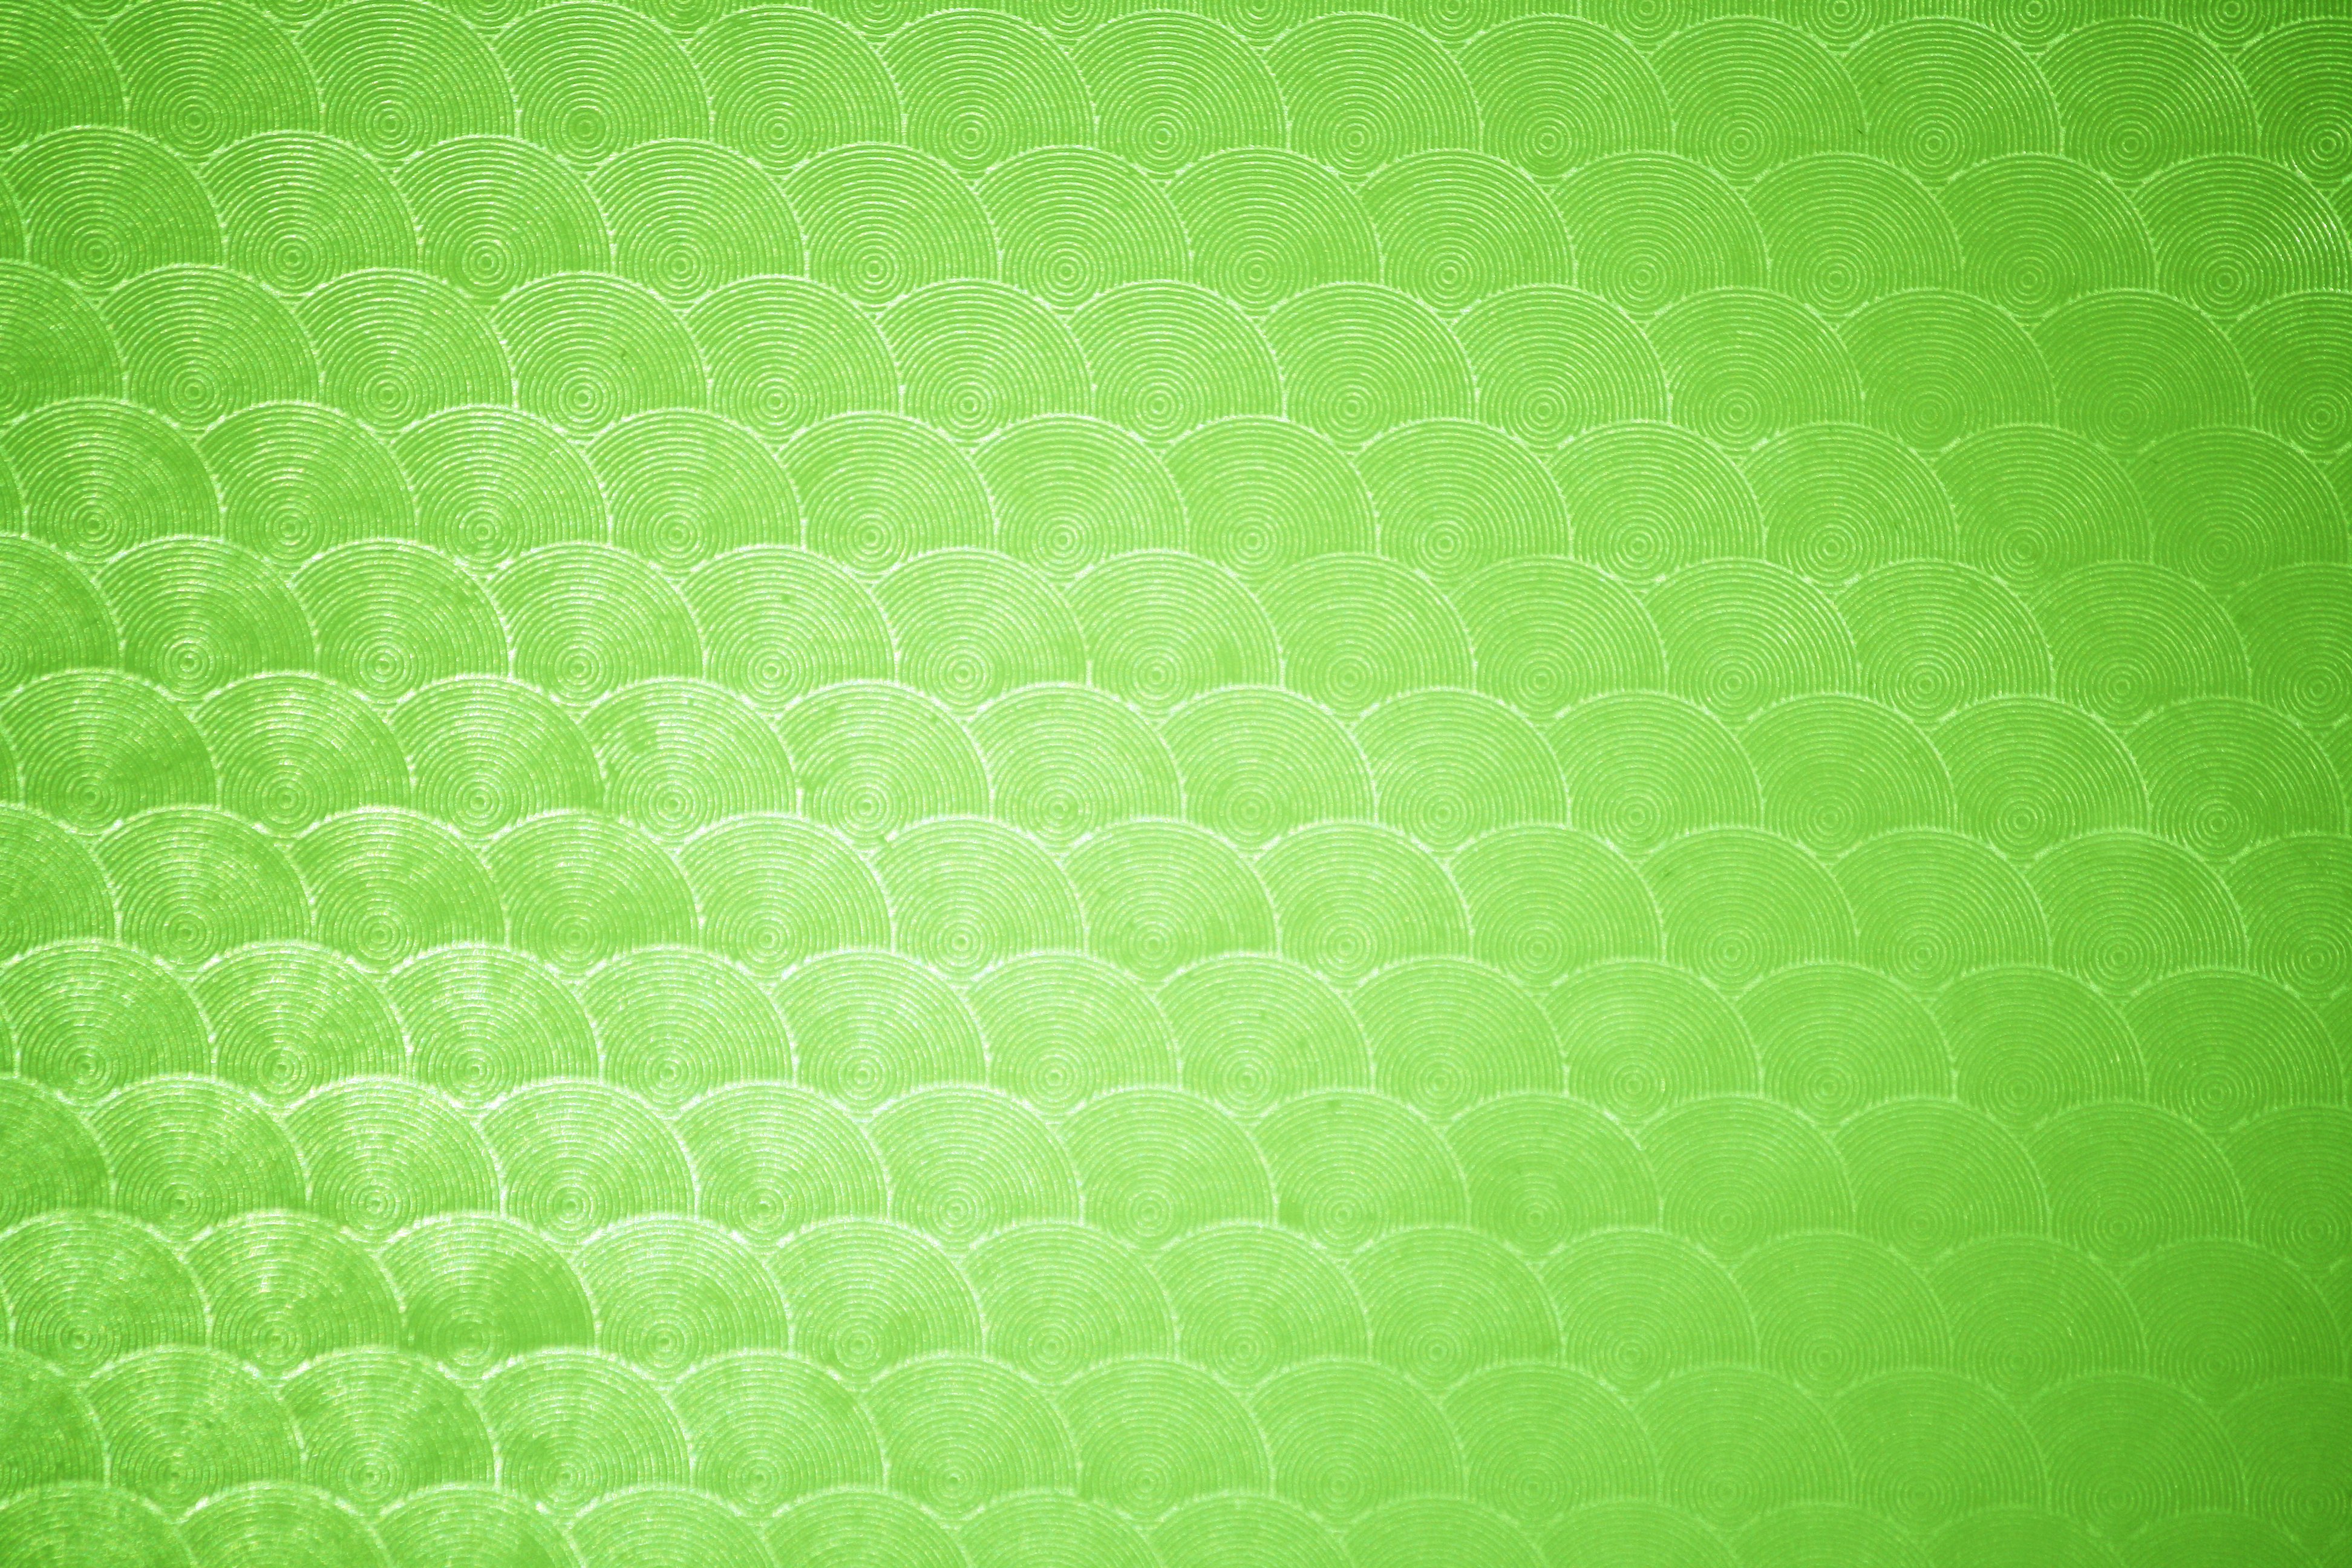 Lime Green Circle Patterned Plastic Texture Picture Free Photograph